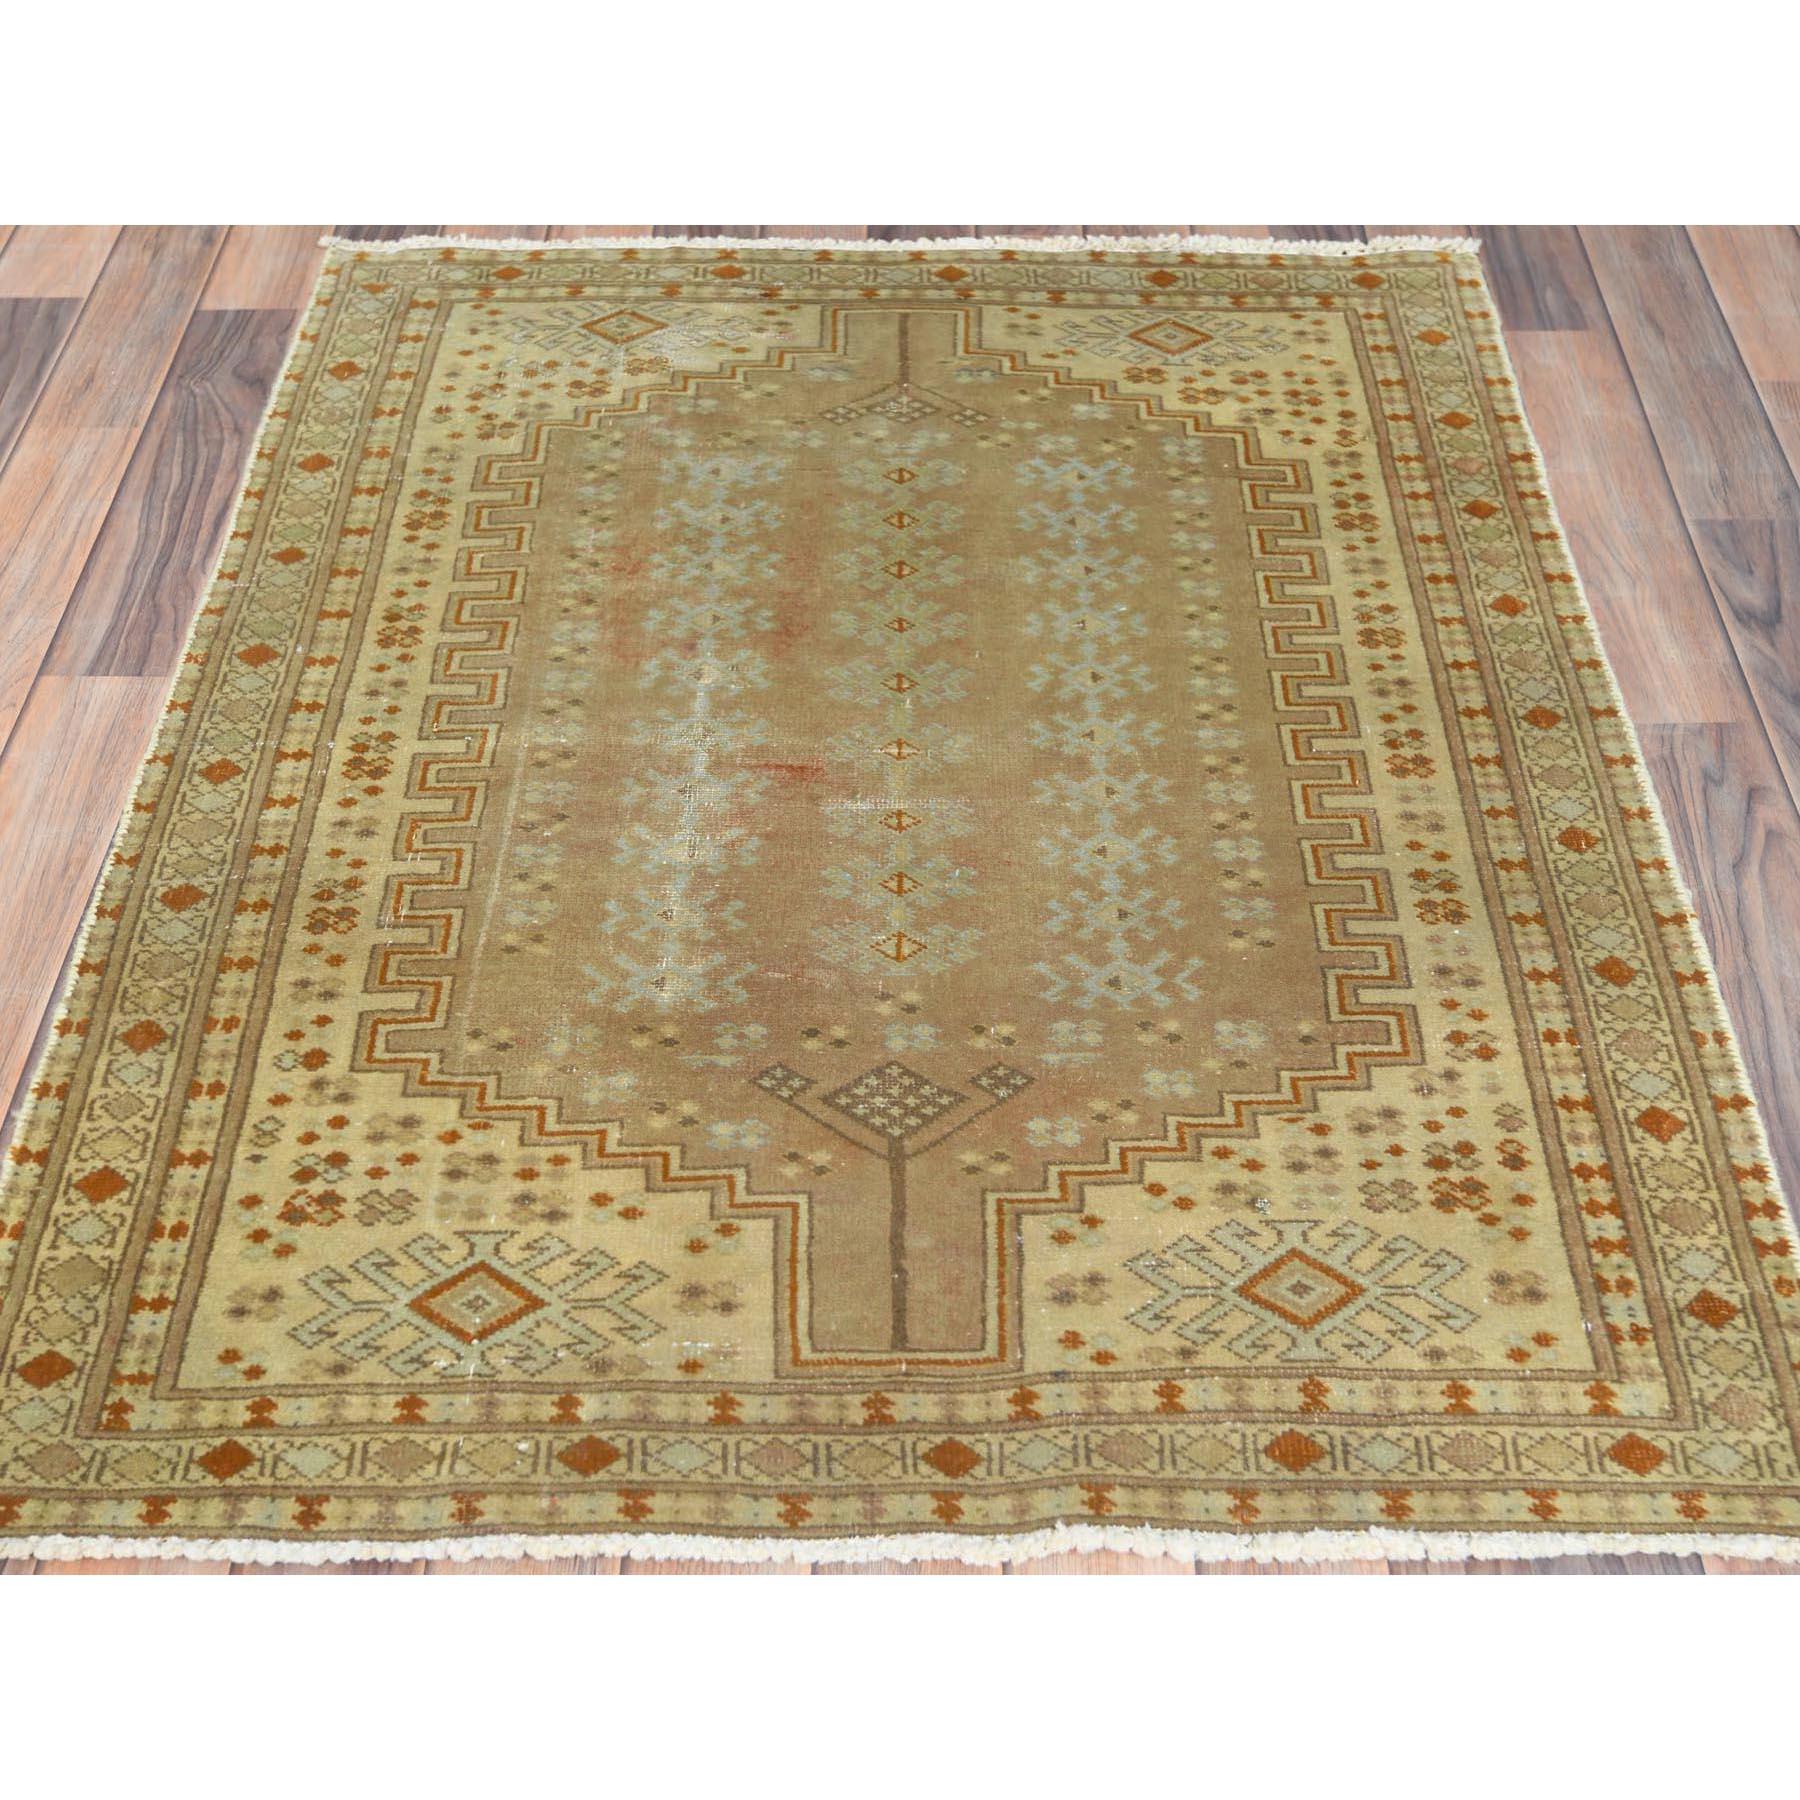 This fabulous hand-knotted carpet has been created and designed for extra strength and durability. This rug has been handcrafted for weeks in the traditional method that is used to make\
Exact Rug Size in Feet and Inches : 3'4